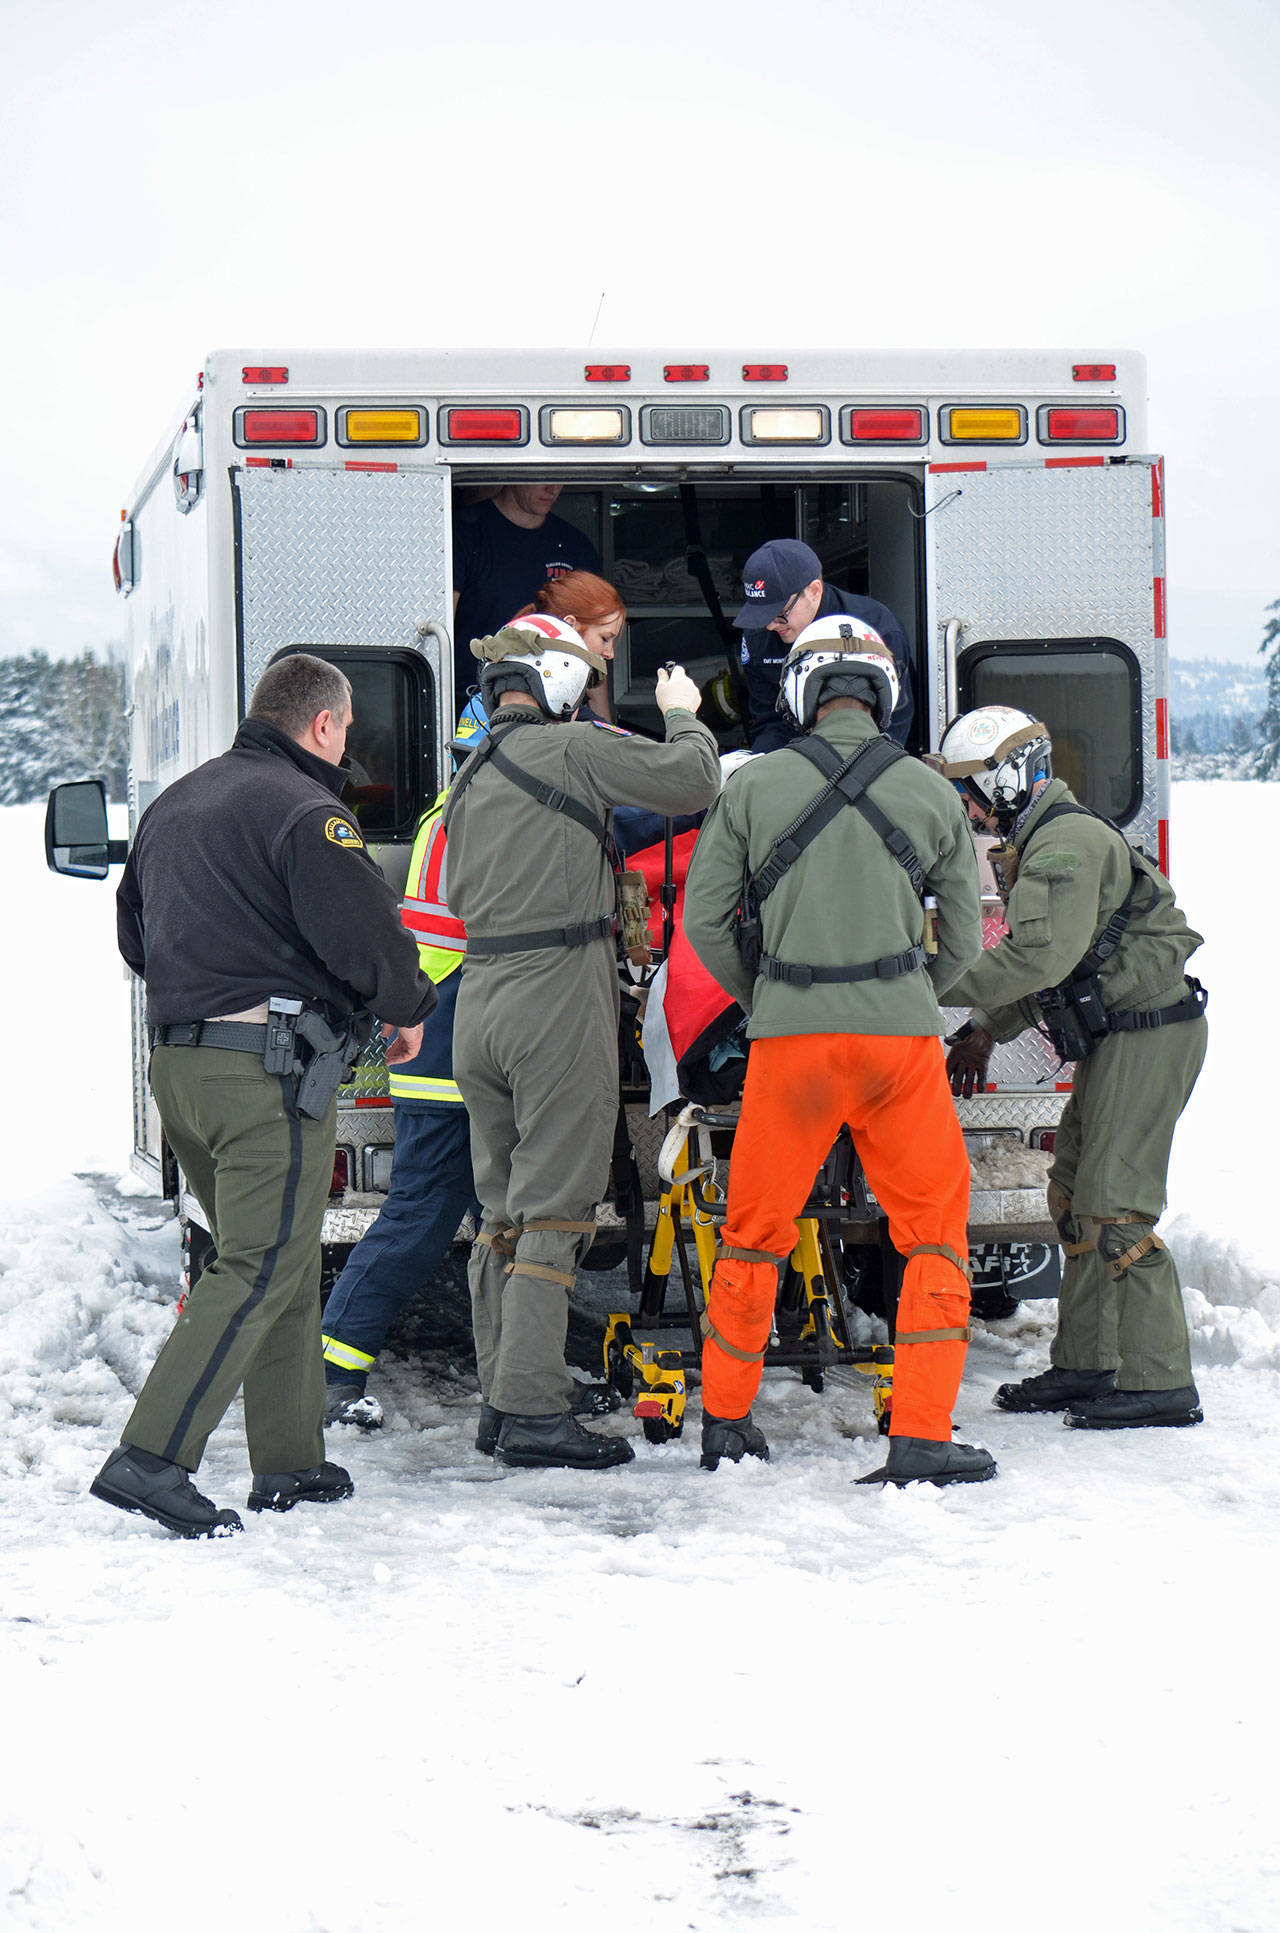 First responders load a man into an ambulance Monday after extricating him from beneath a collapsed roof. (Clallam County Fire District No. 3)